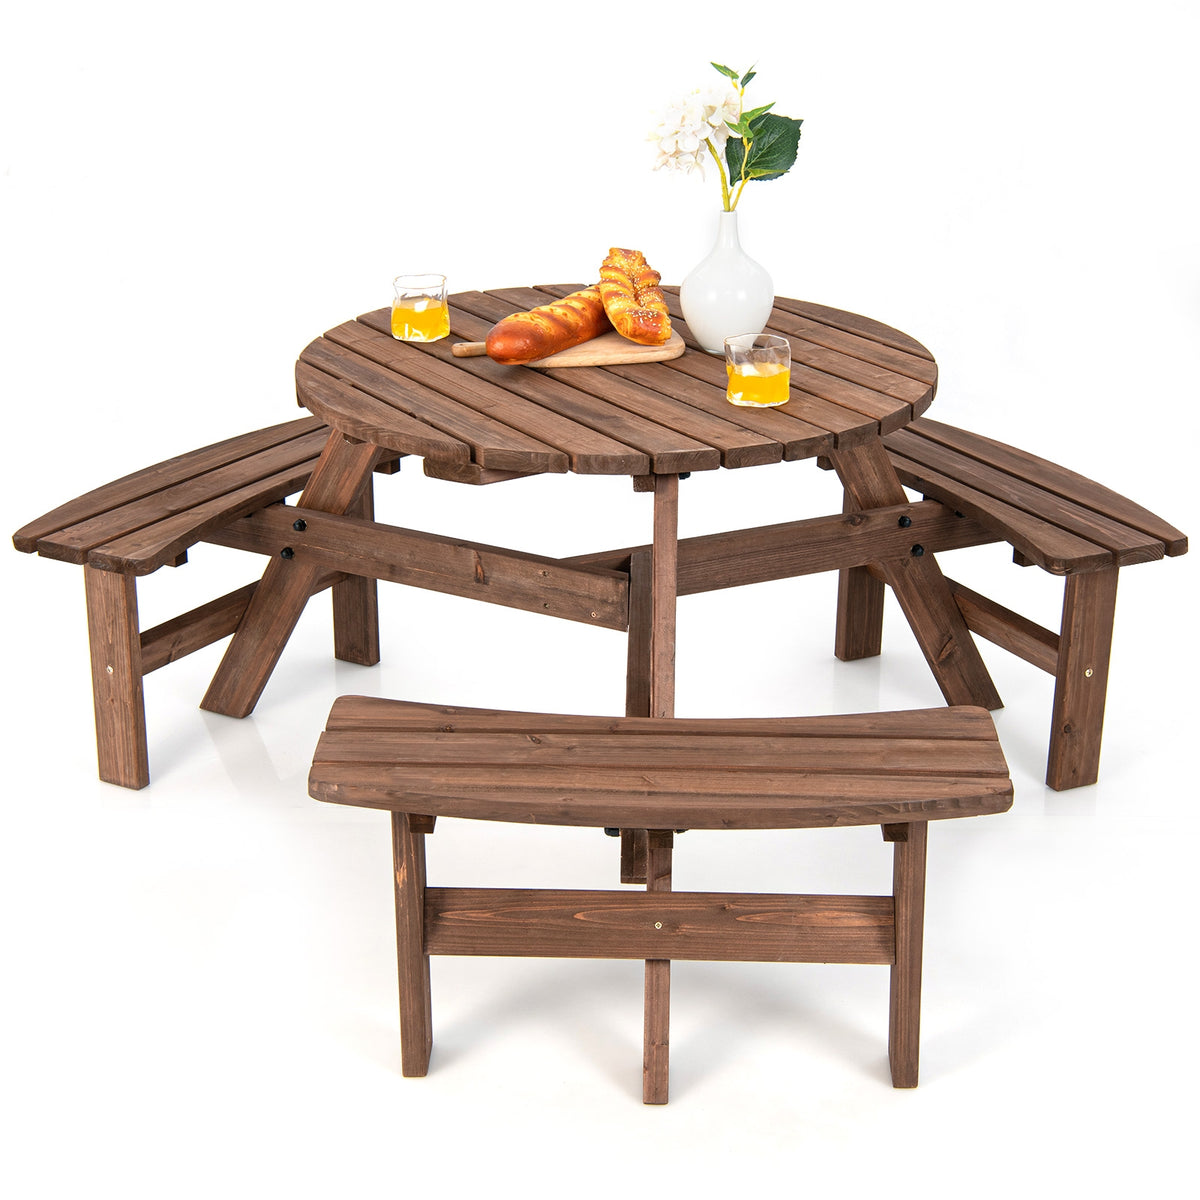 6-Person Patio Wood Table Beer Bench Set for Picnic & Beach